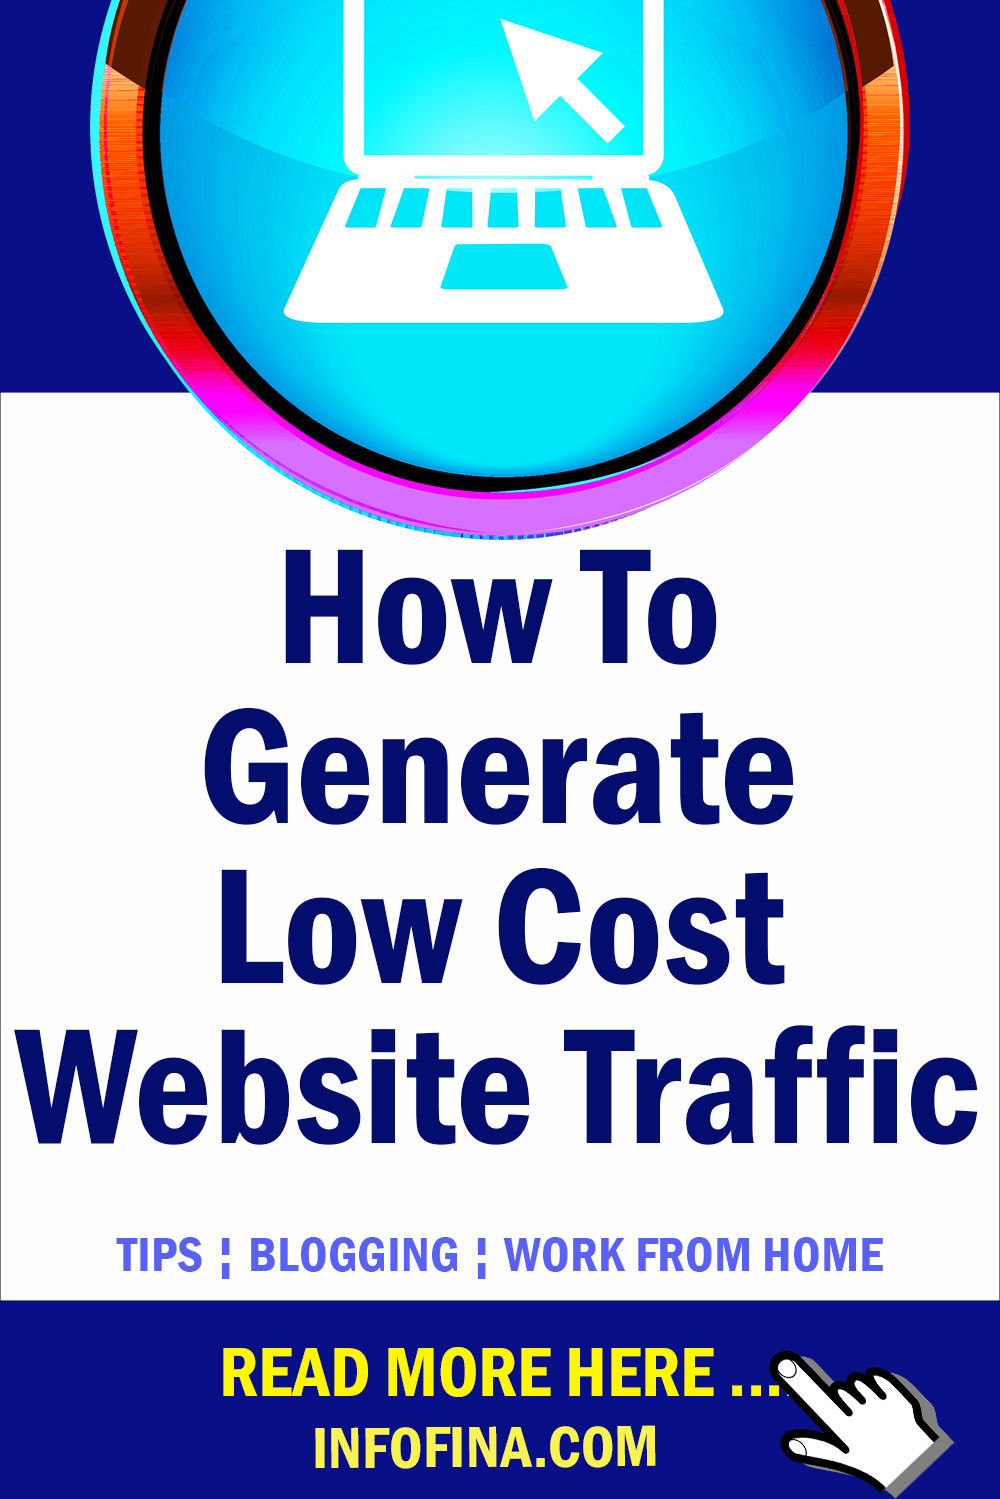 How-To-Generate-Low-Cost-Website-Traffic / Canva